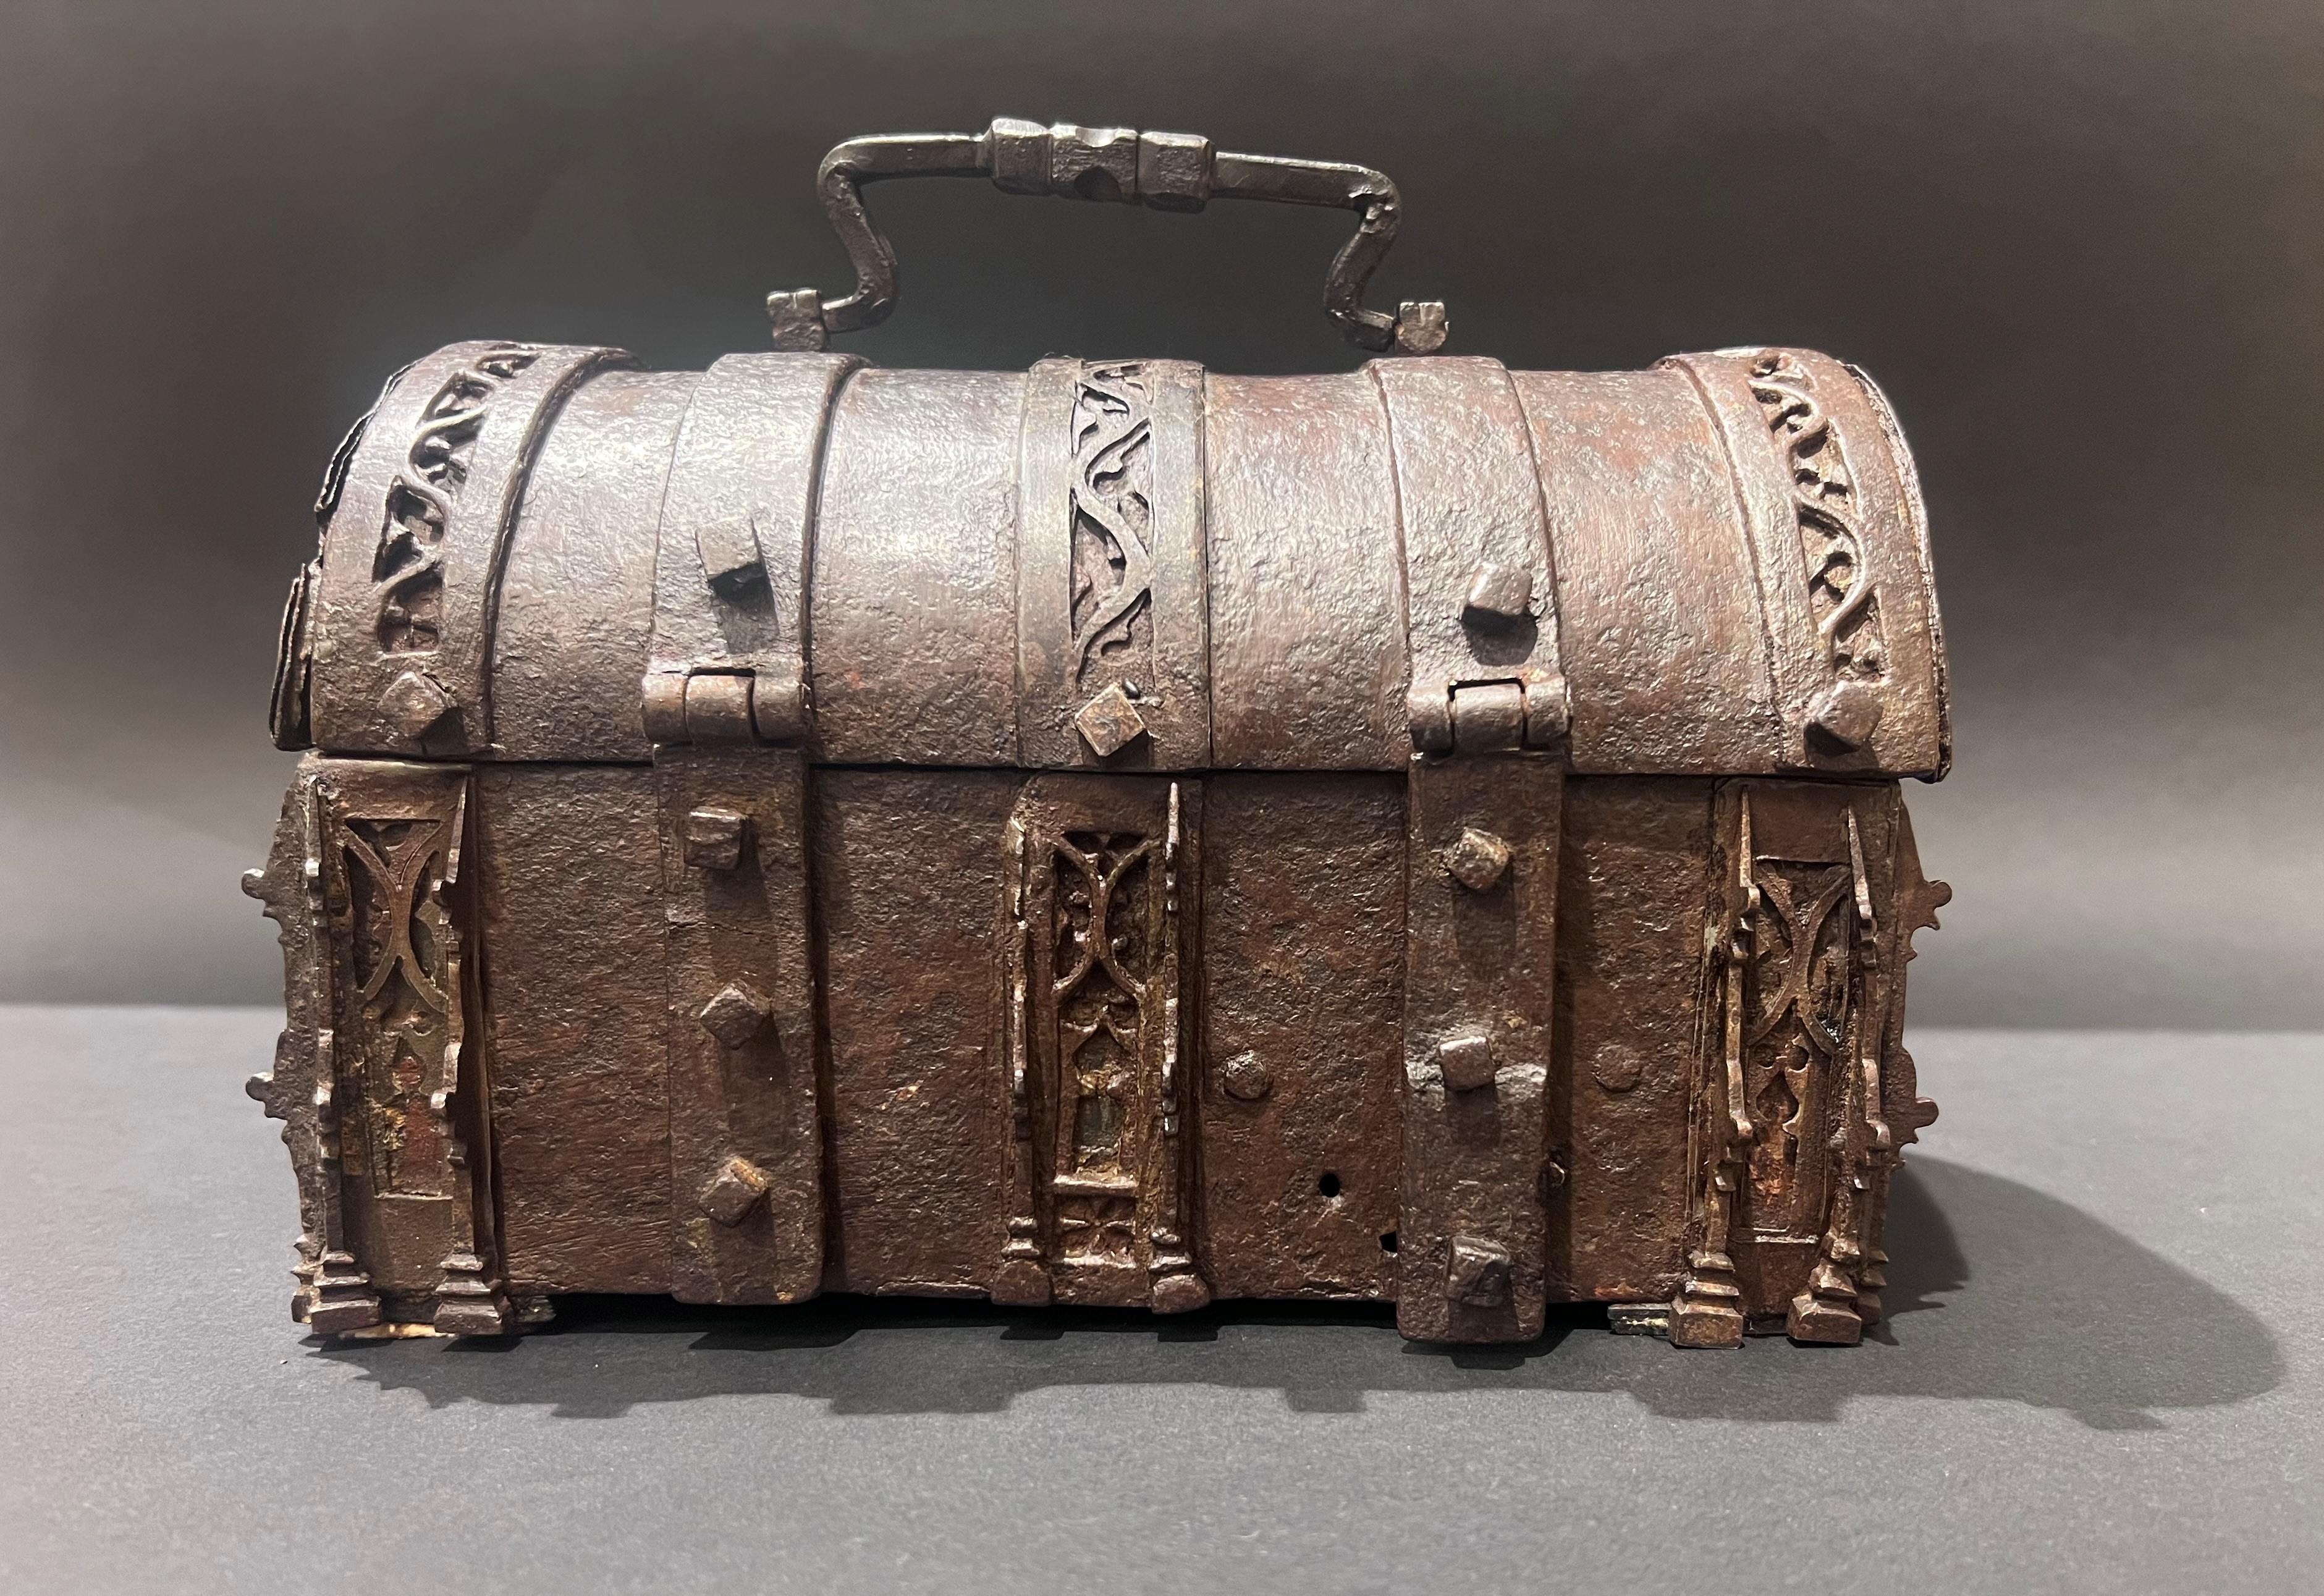 A French gothic iron casket
Dimensions: h. 18 cm, l. 23 cm, p. 14cm
15th century
France

Without key

A rare parallelepipedal box with a domed lid, it is decorated on all sides with frets with fenestrations flanked by pinnacles. Hinged on one side,